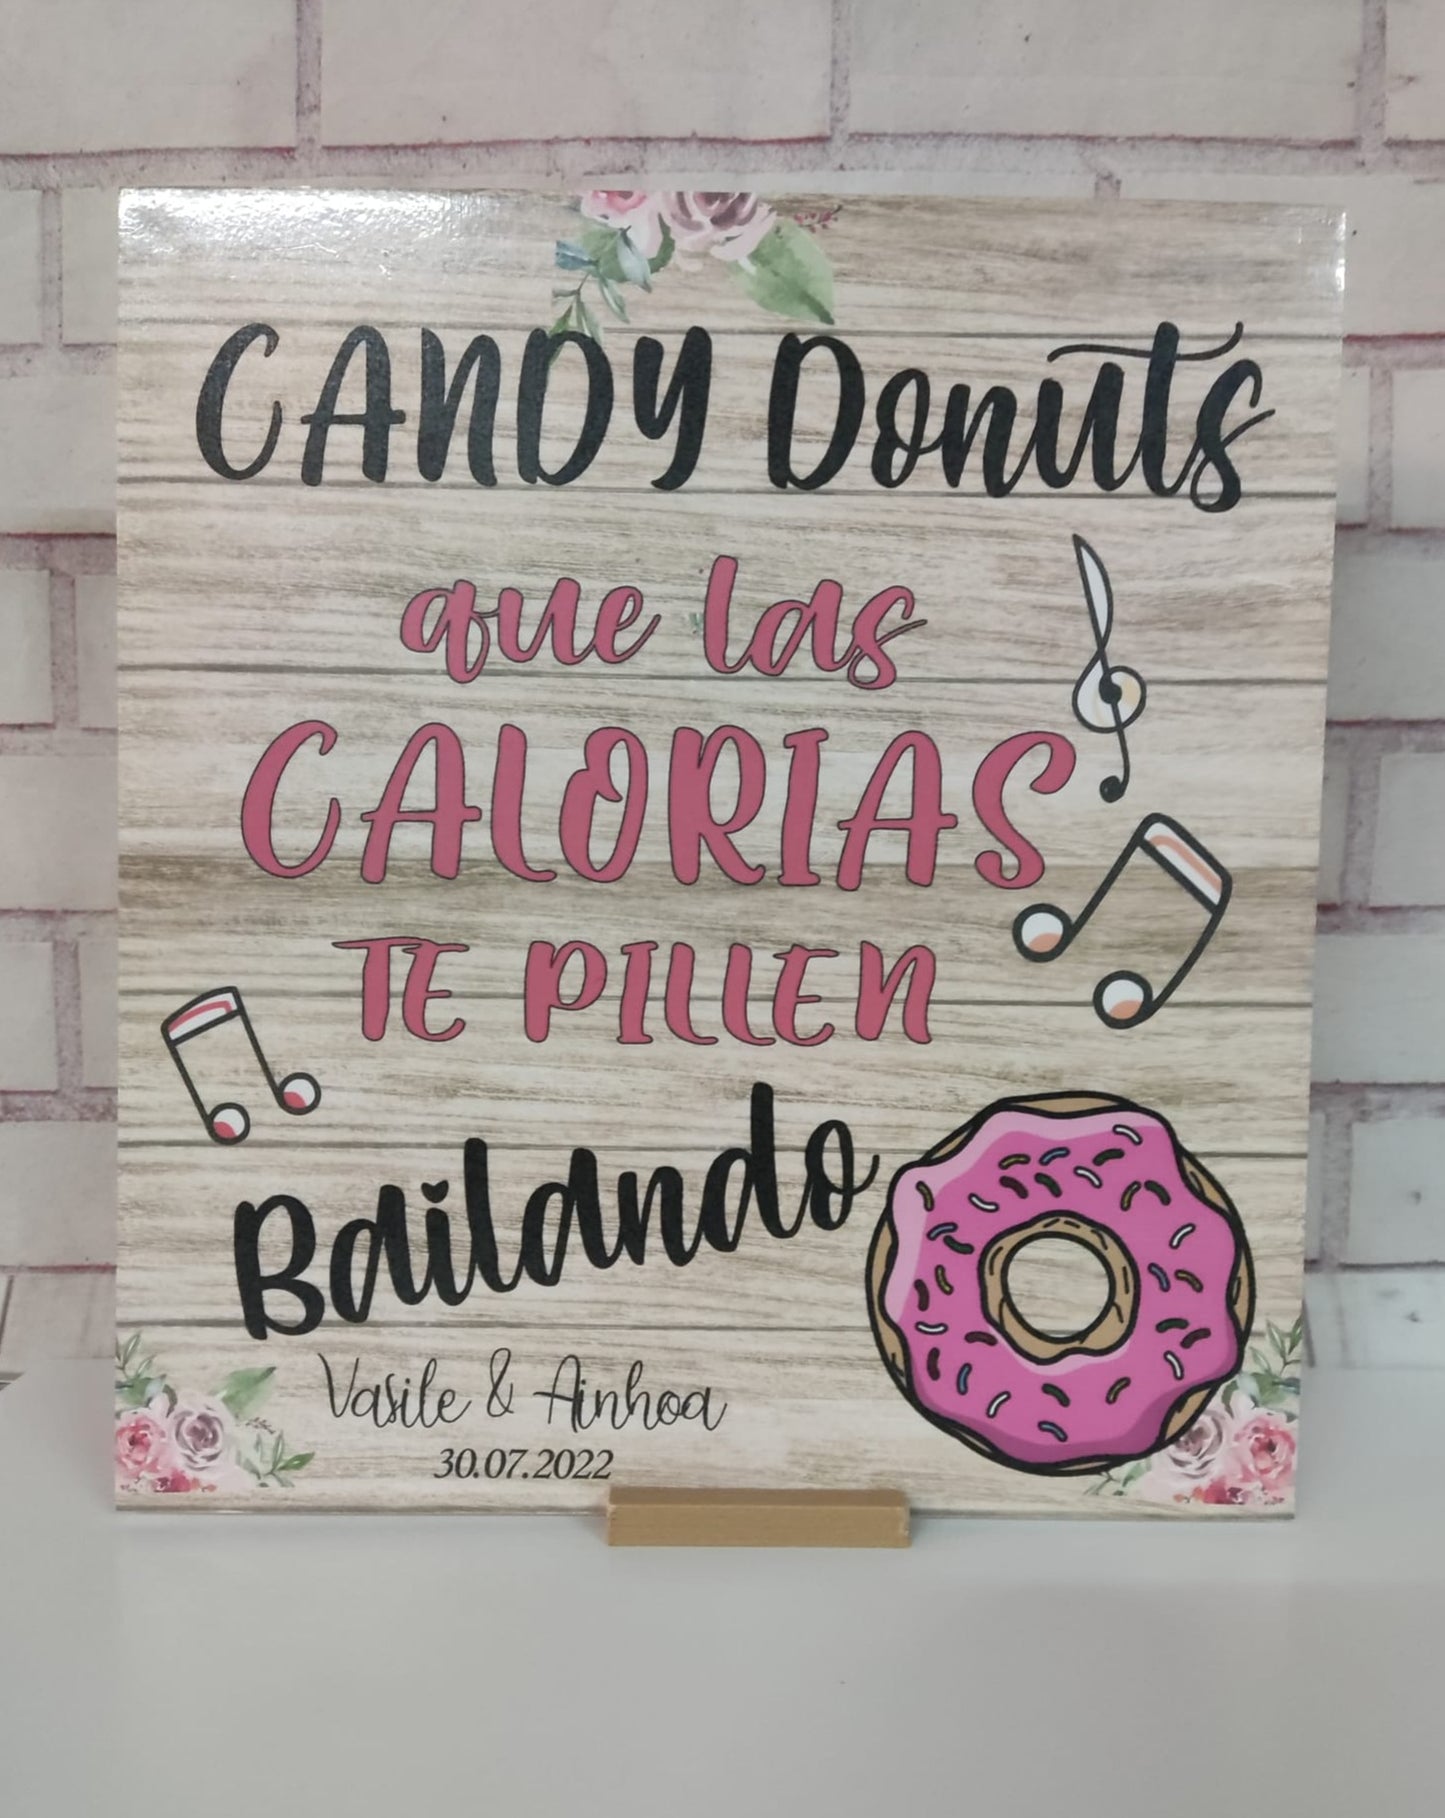 Cartel decorativo Candy donuts